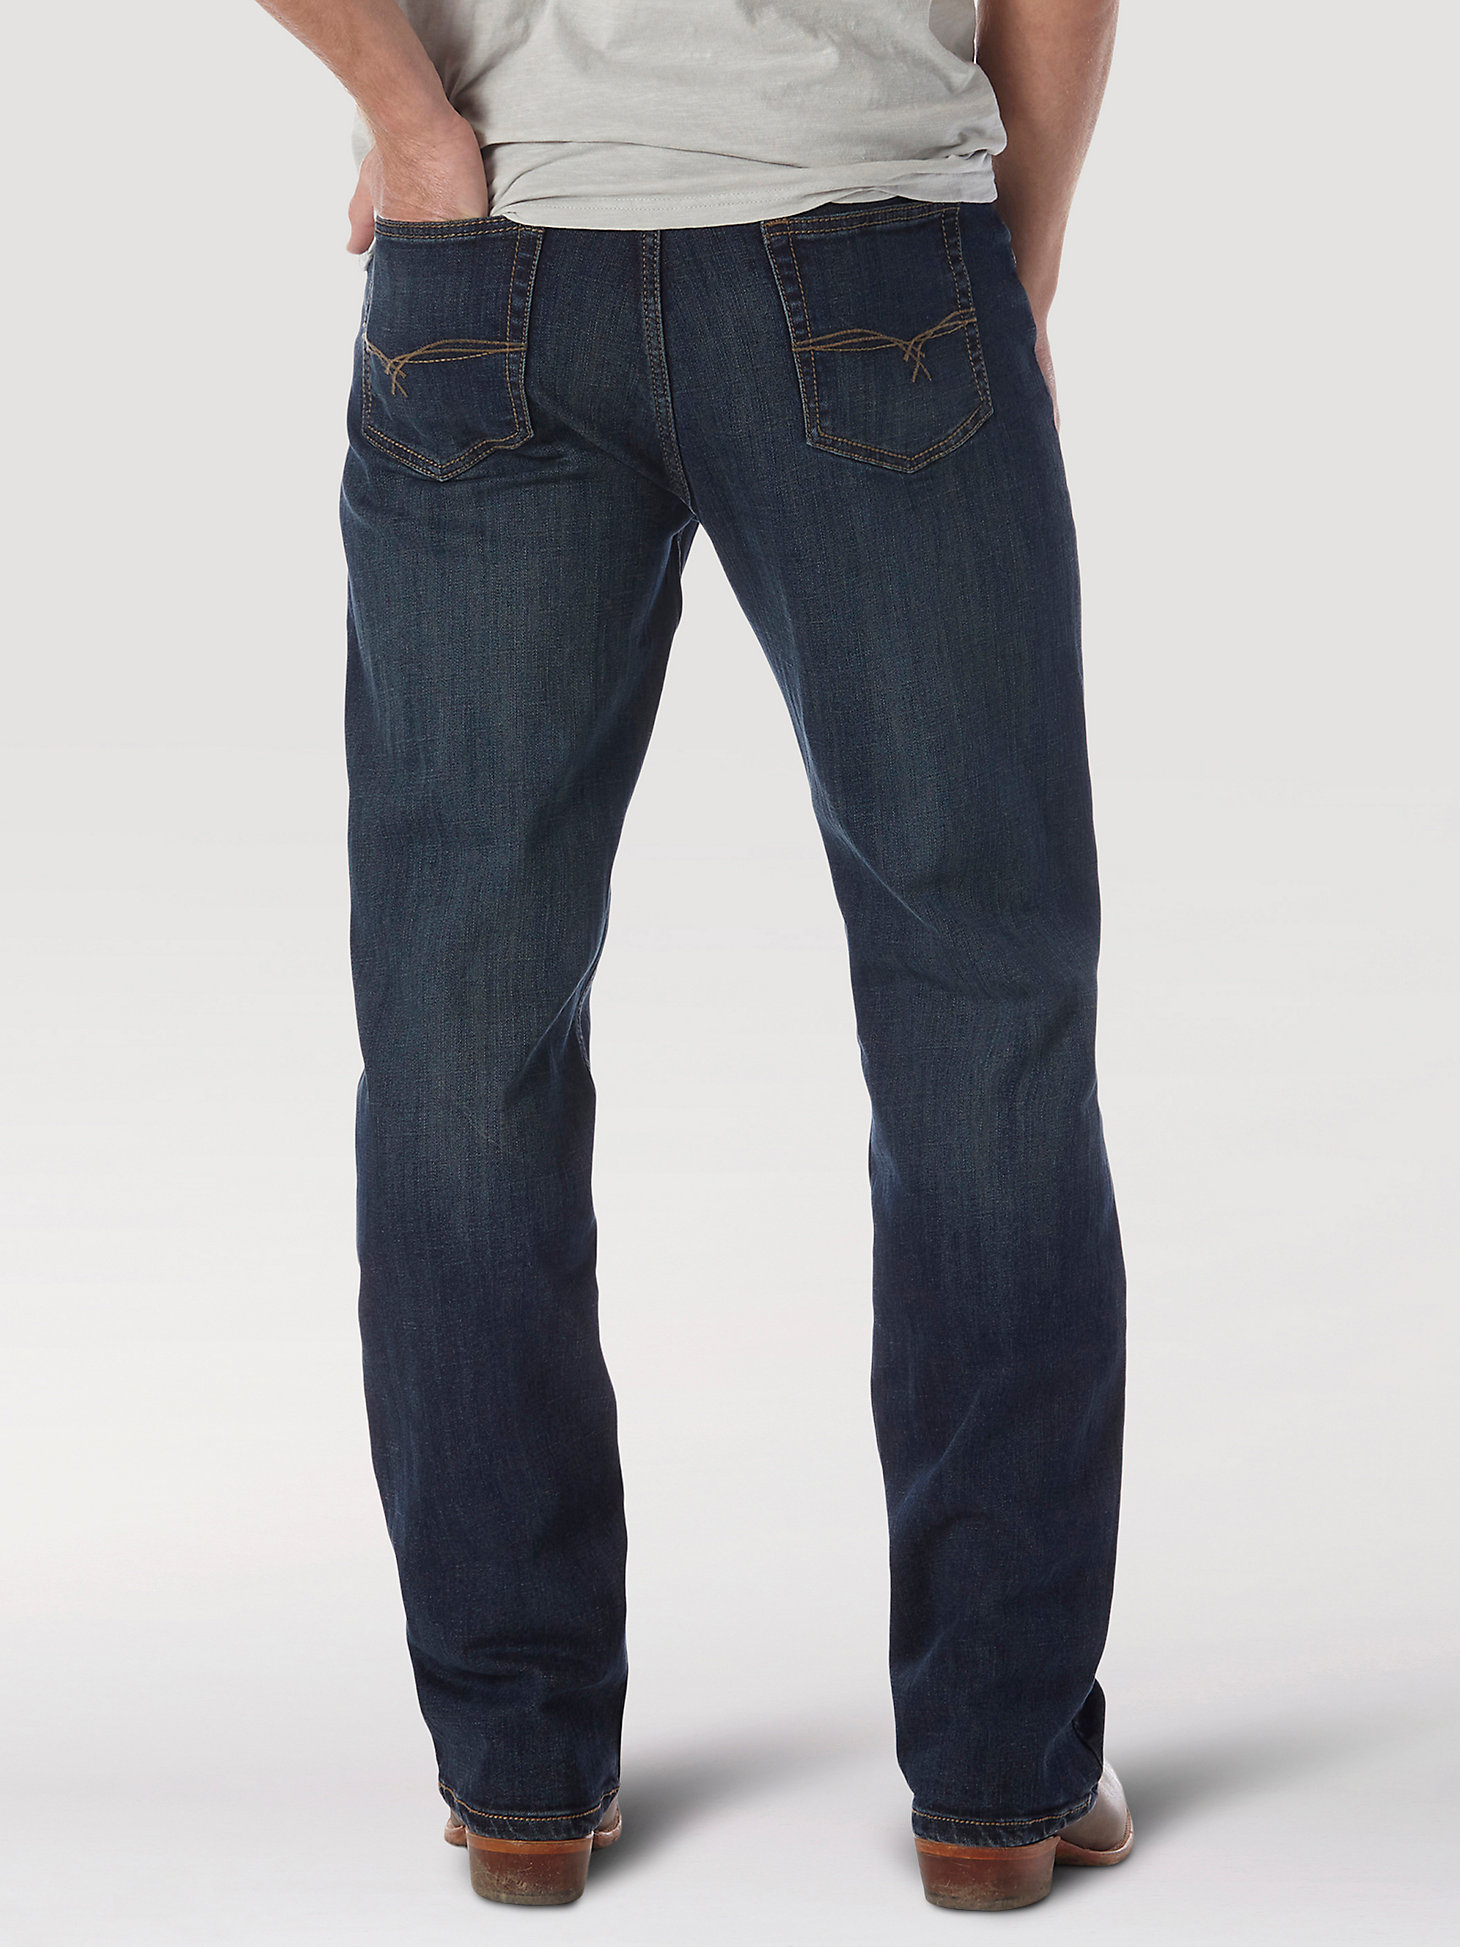 Men's Wrangler® 20X® No. 33 Extreme Relaxed Fit Jean in Appleby alternative view 2